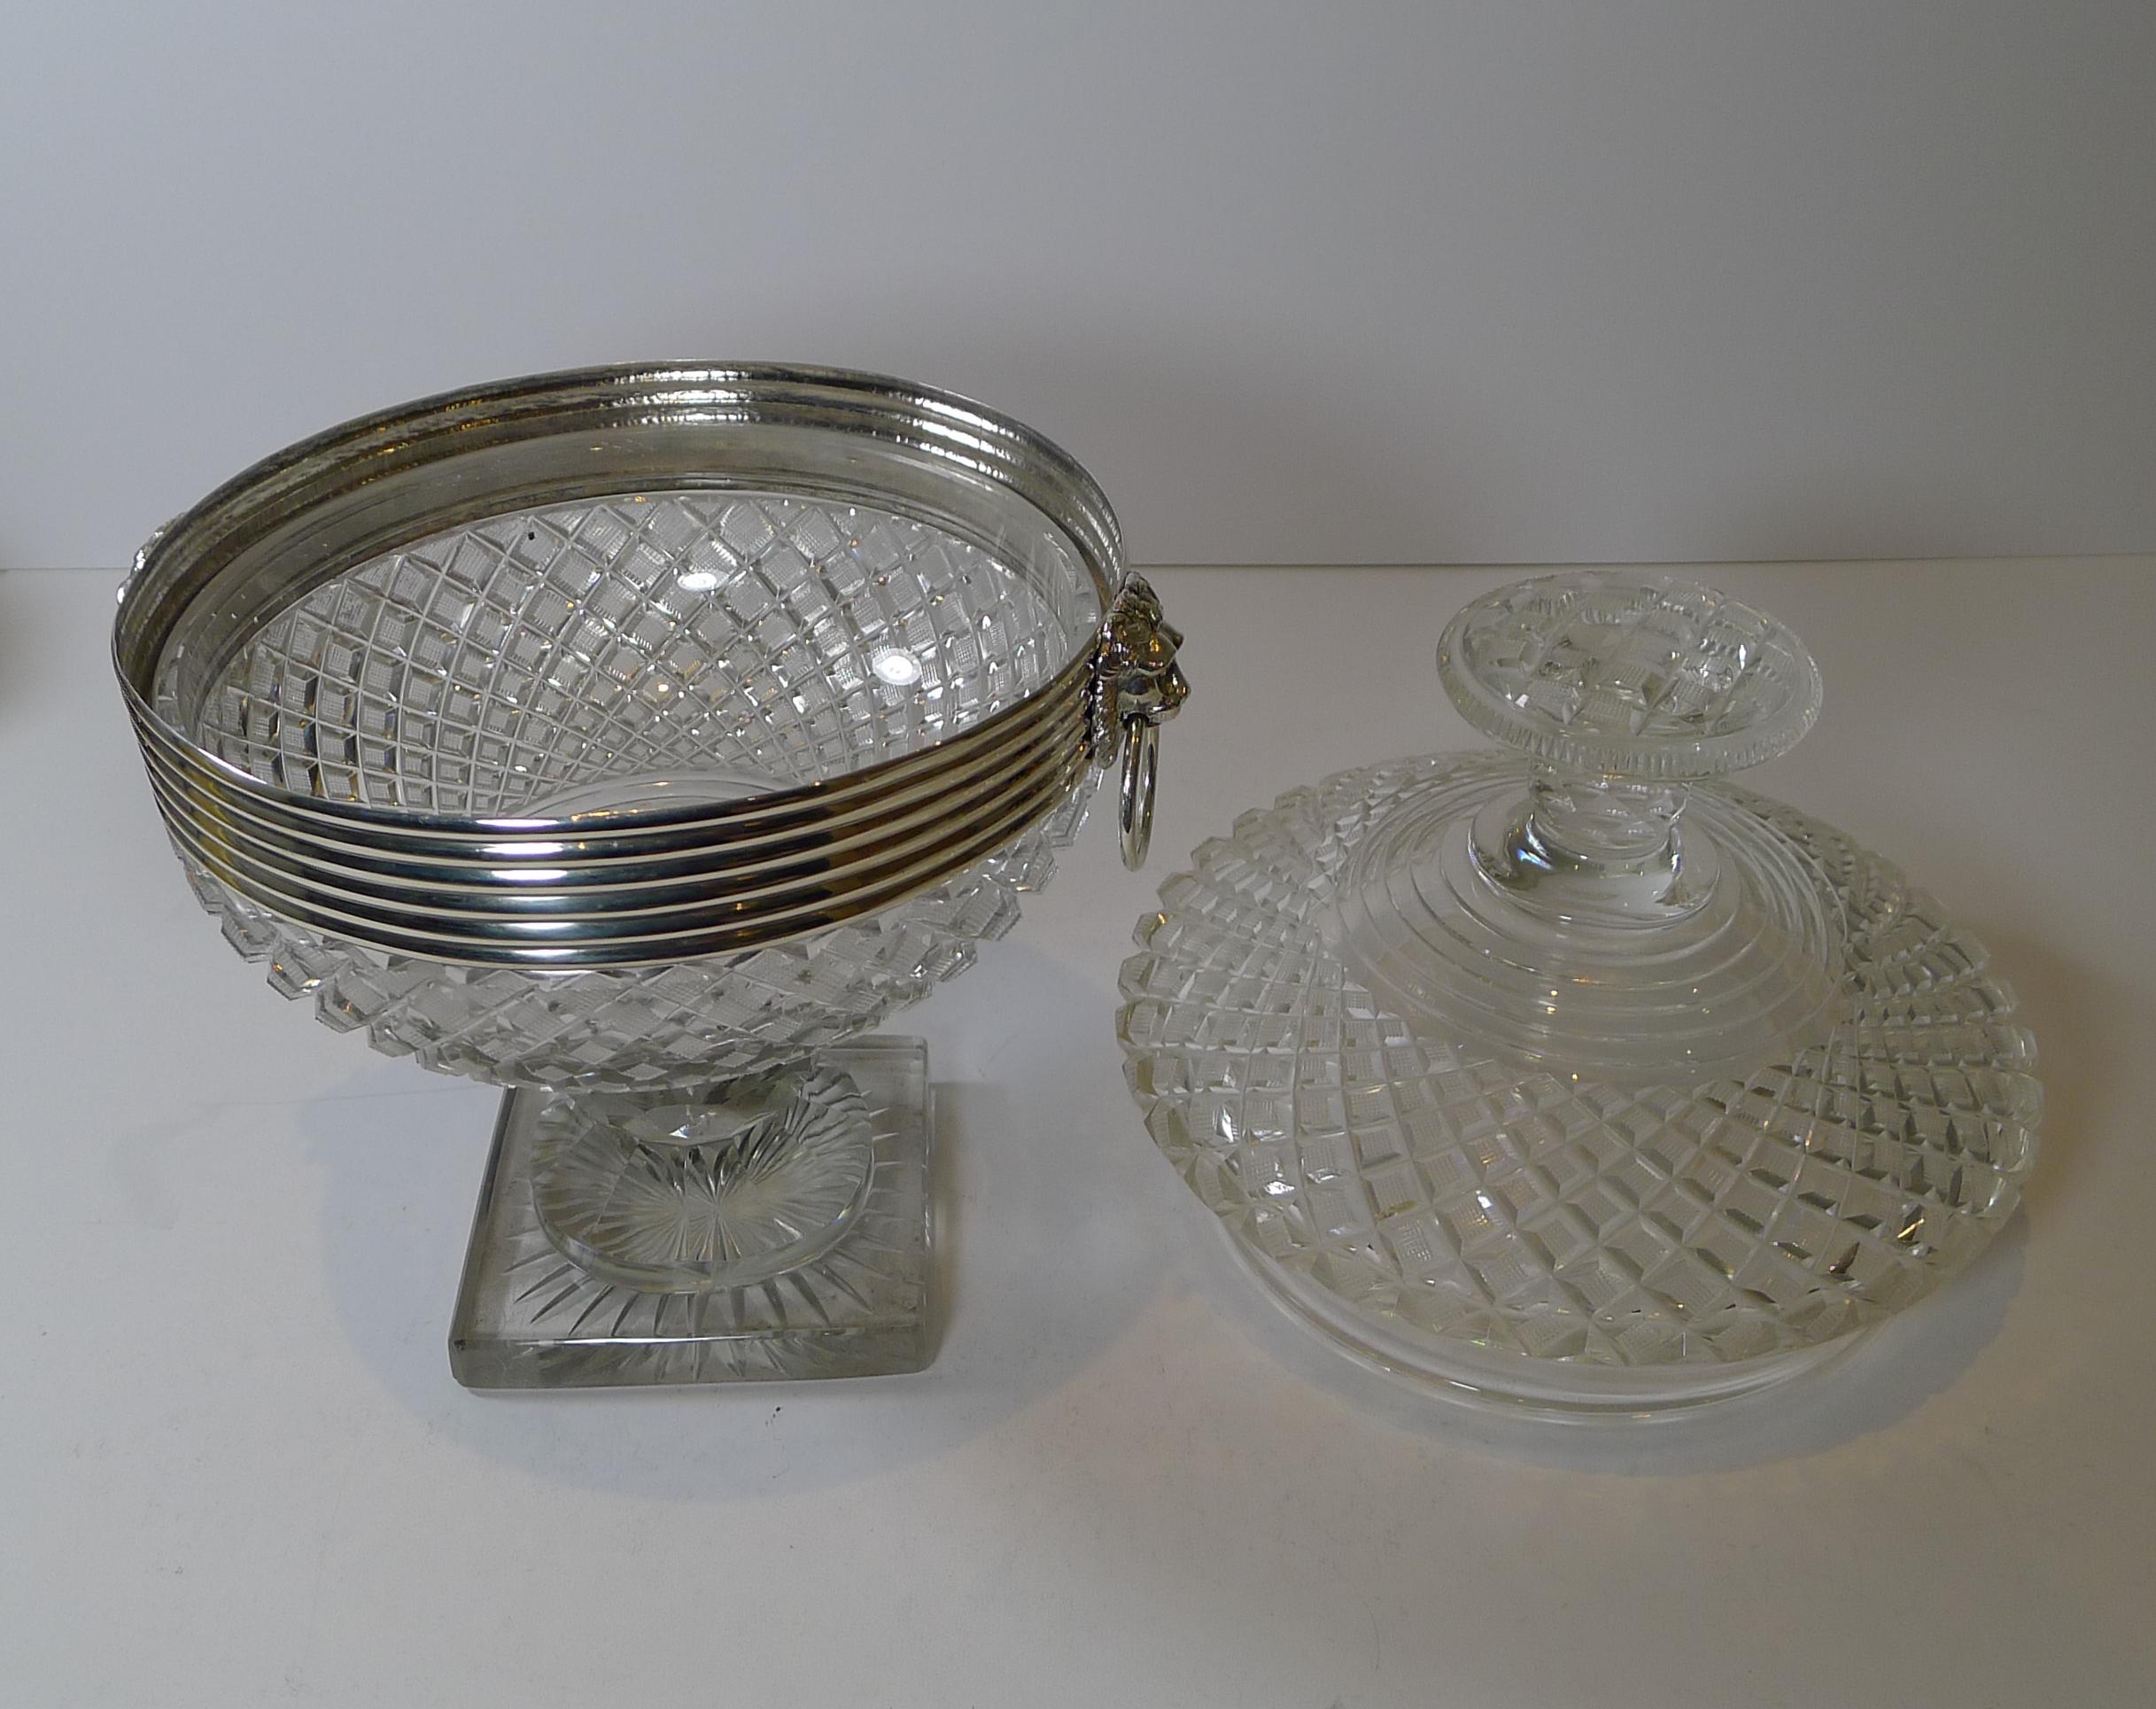 Grand Cut Crystal & Dutch Silver Covered Sweet / Candy Bowl c.1880 For Sale 4